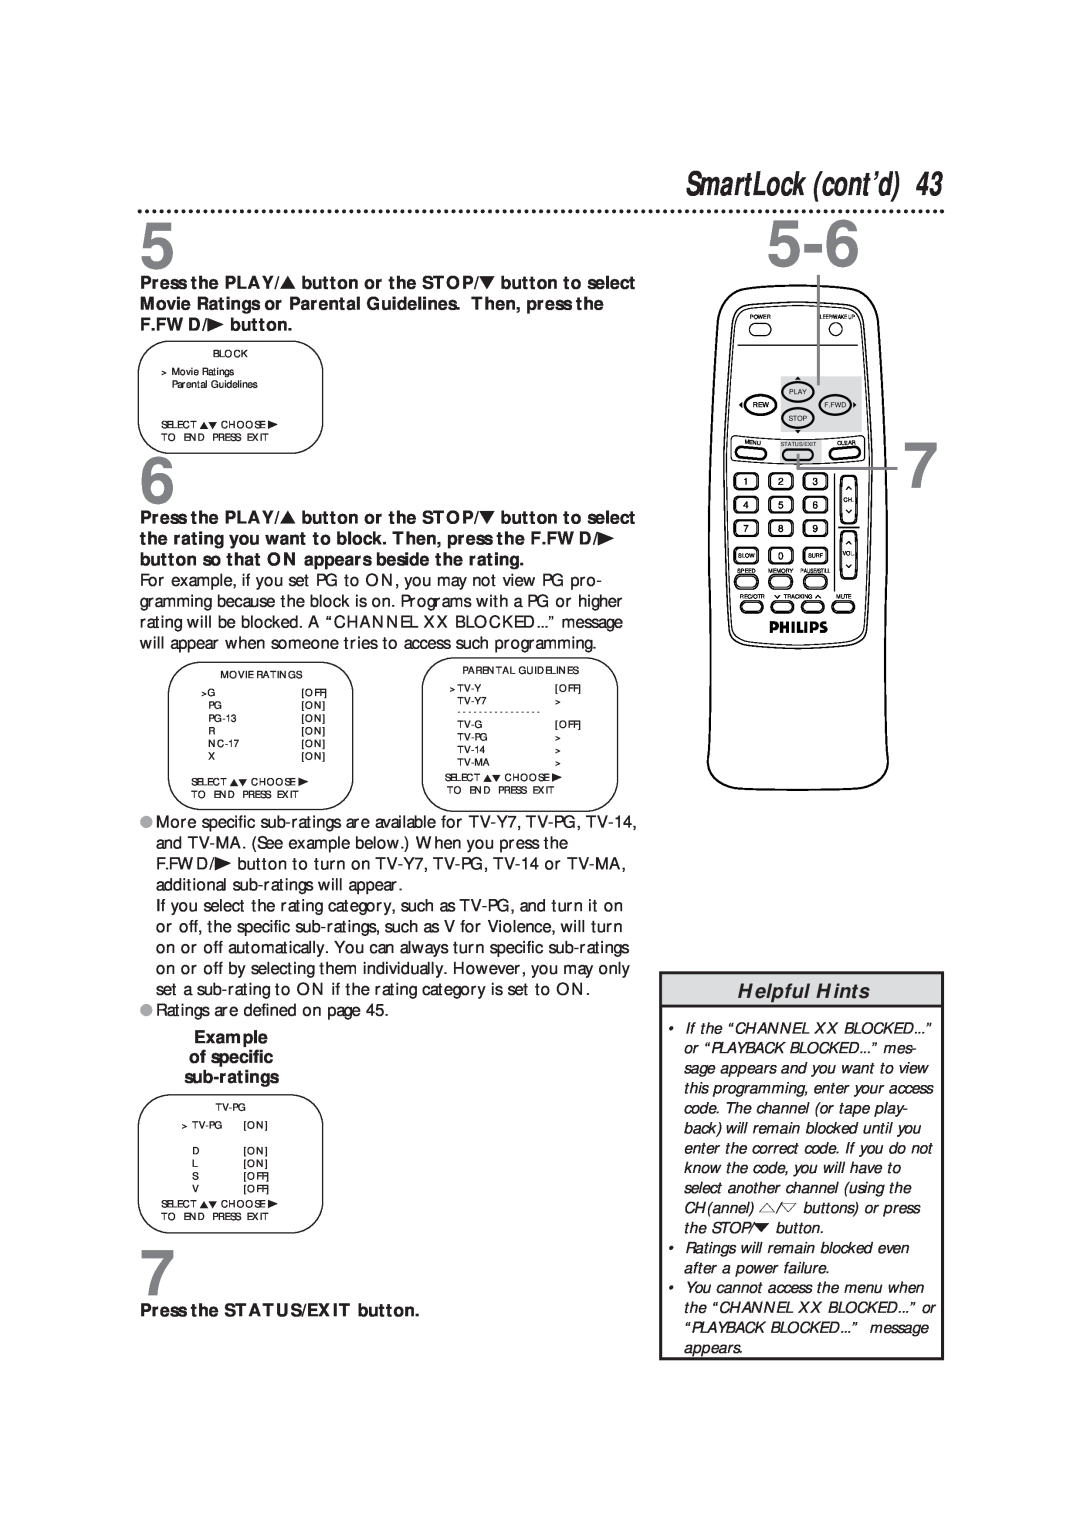 Magnavox CCB193AT owner manual SmartLock cont’d, Helpful Hints, Ratings are defined on page 